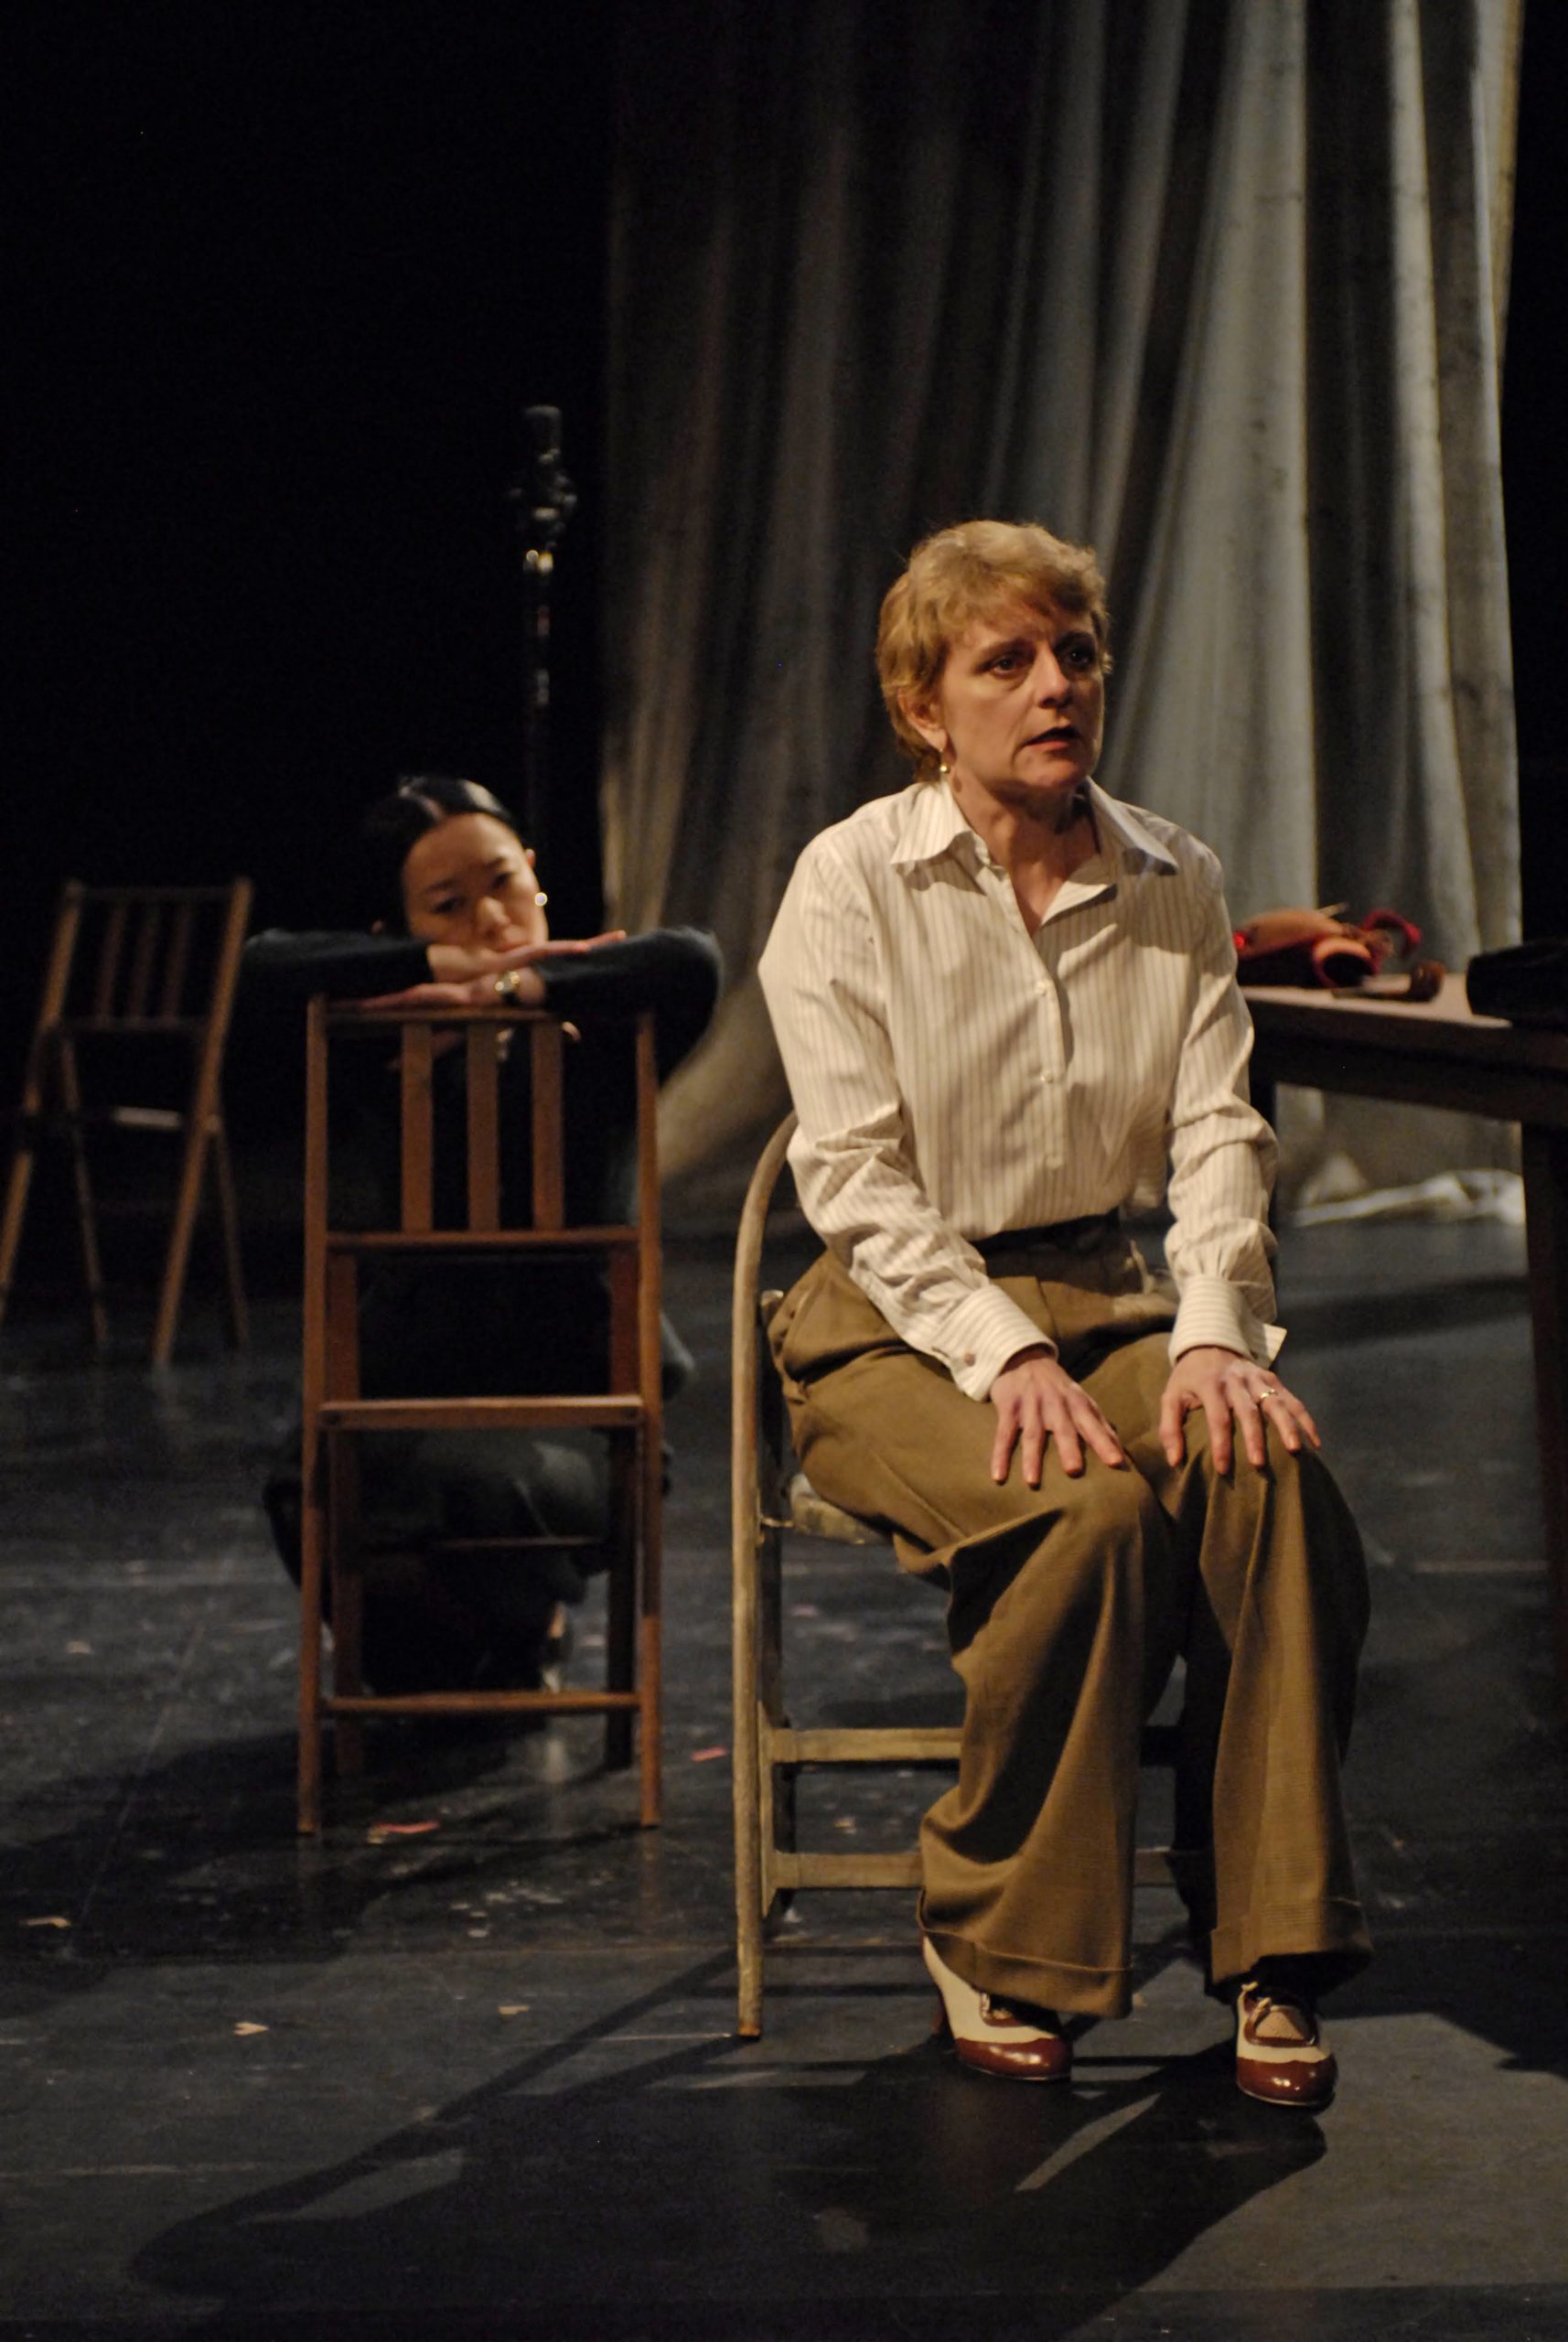 A woman in tan pants and a white button down sitting in a chair facing the camera. To her left is a person sitting backwards in a chair admiring her.